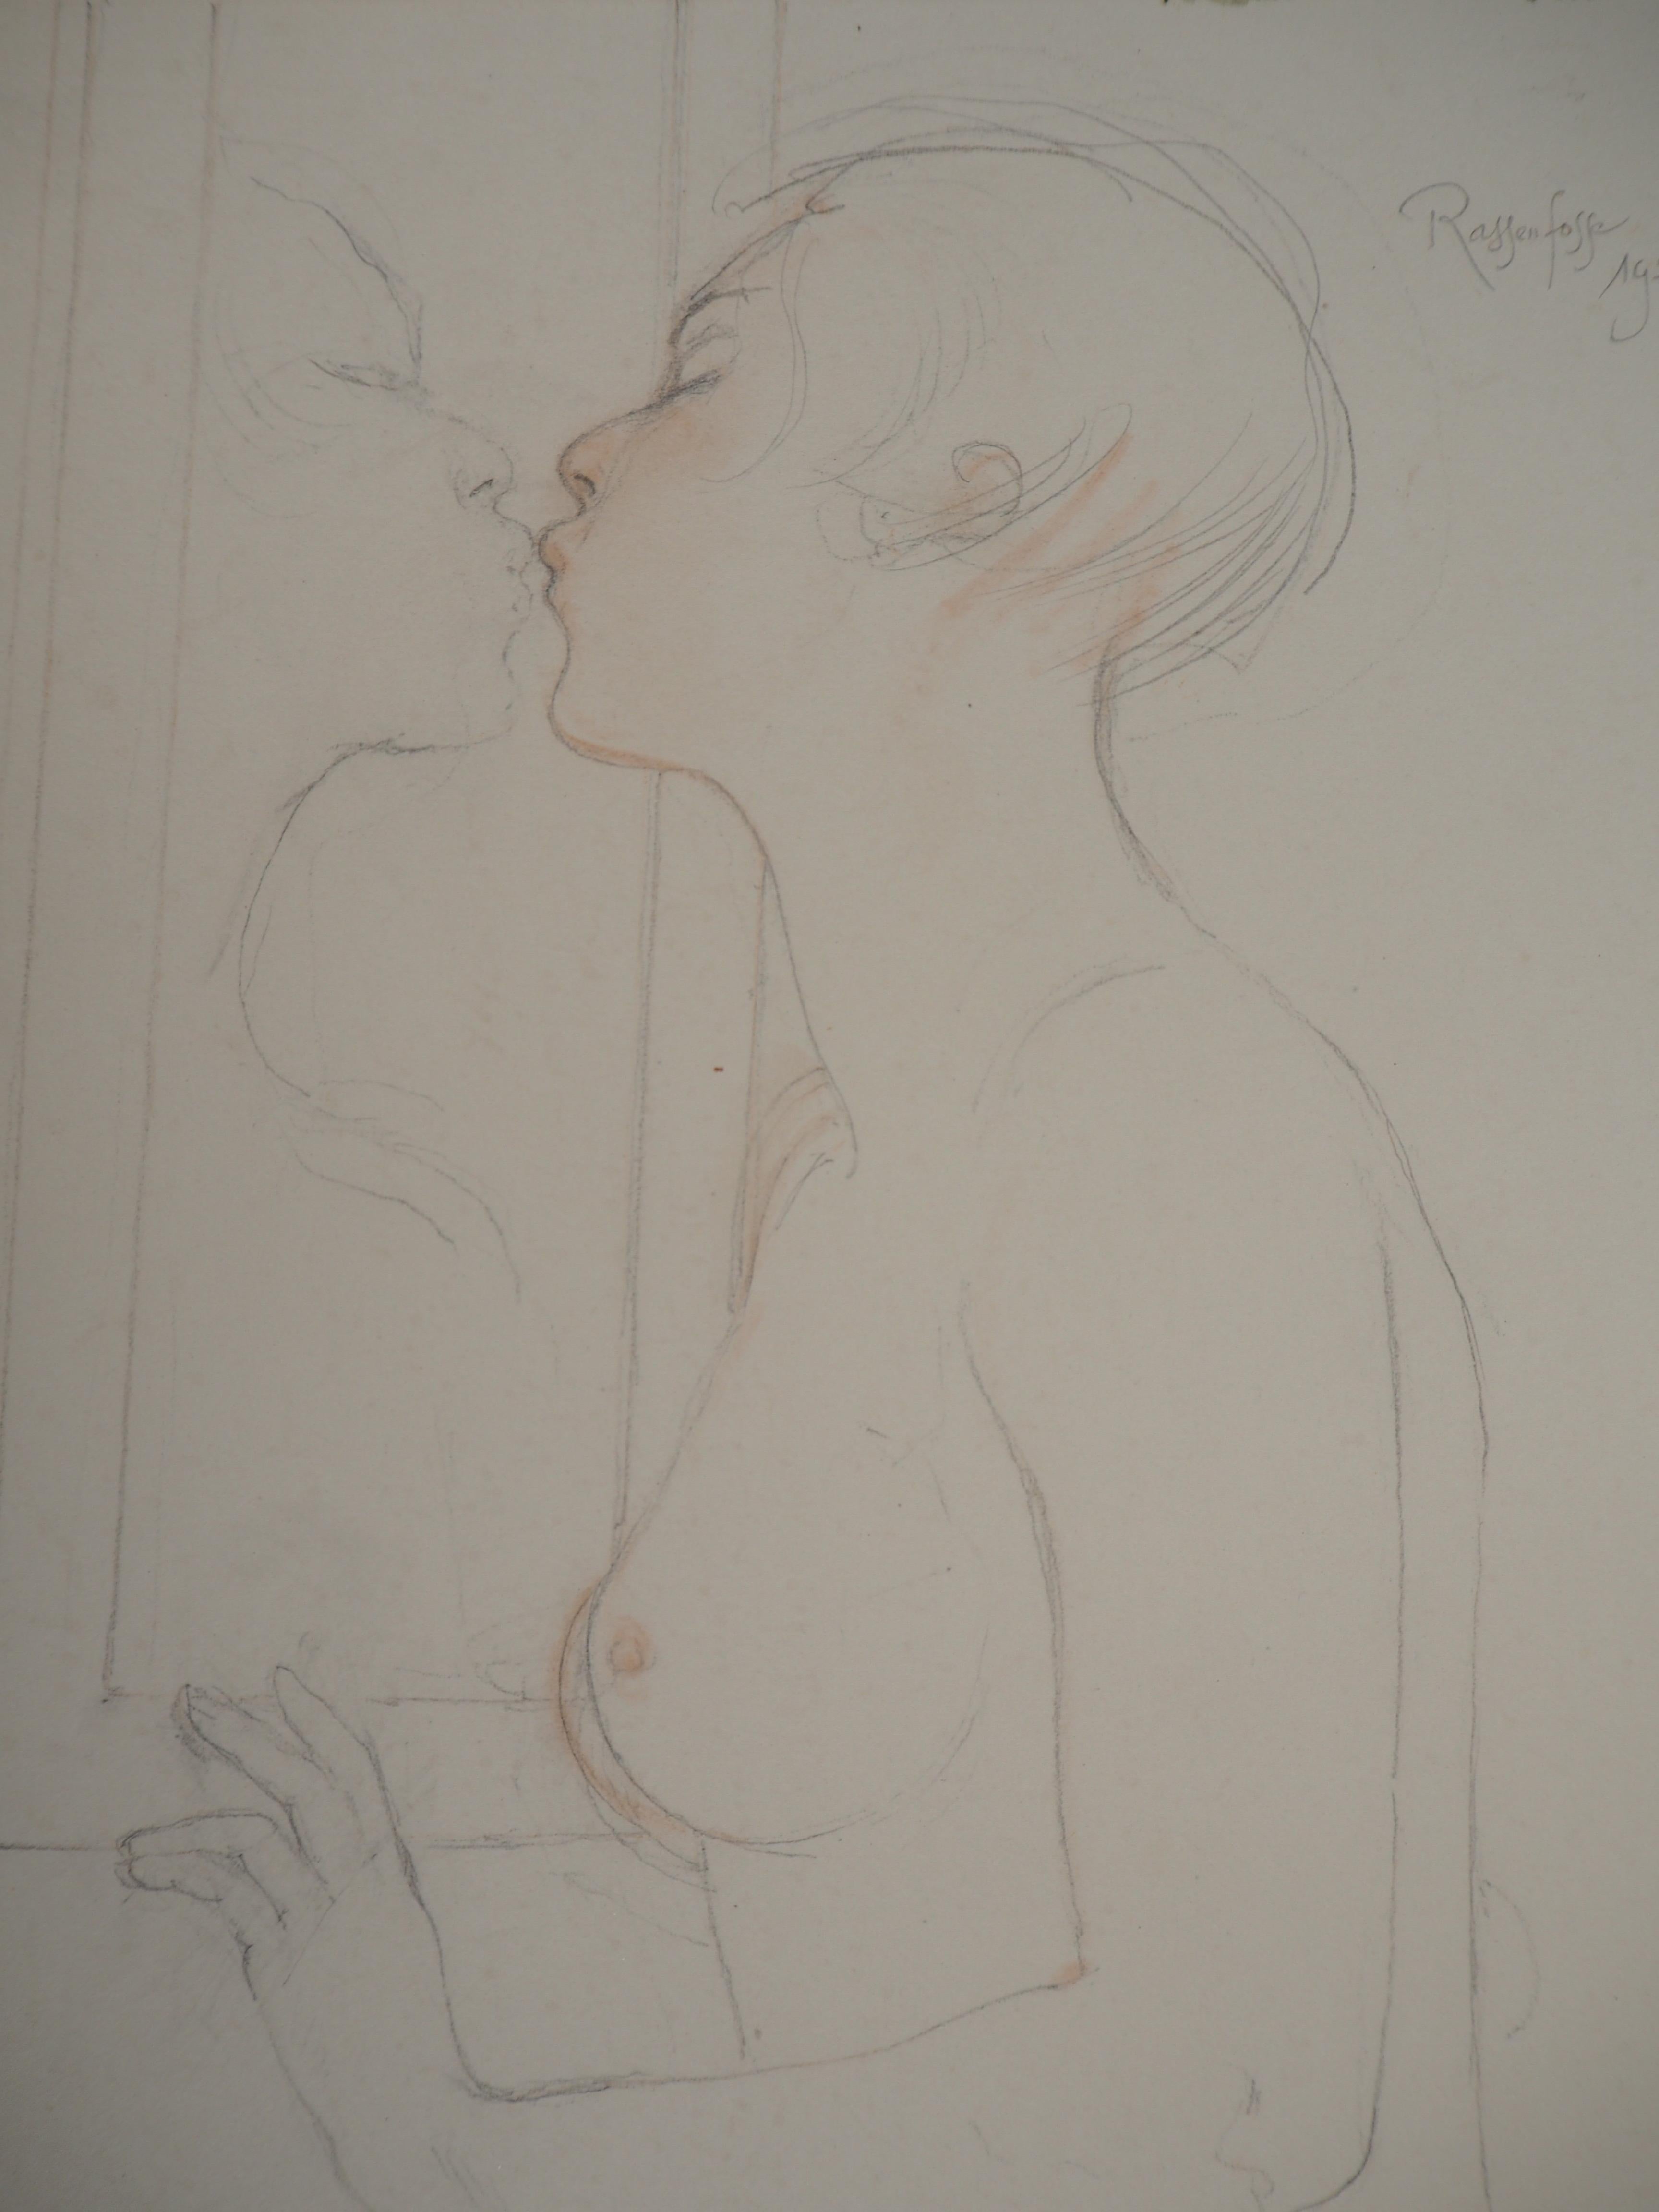 In Love with the Mirror - Original drawing, Handsigned - Modern Art by Armand Rassenfosse